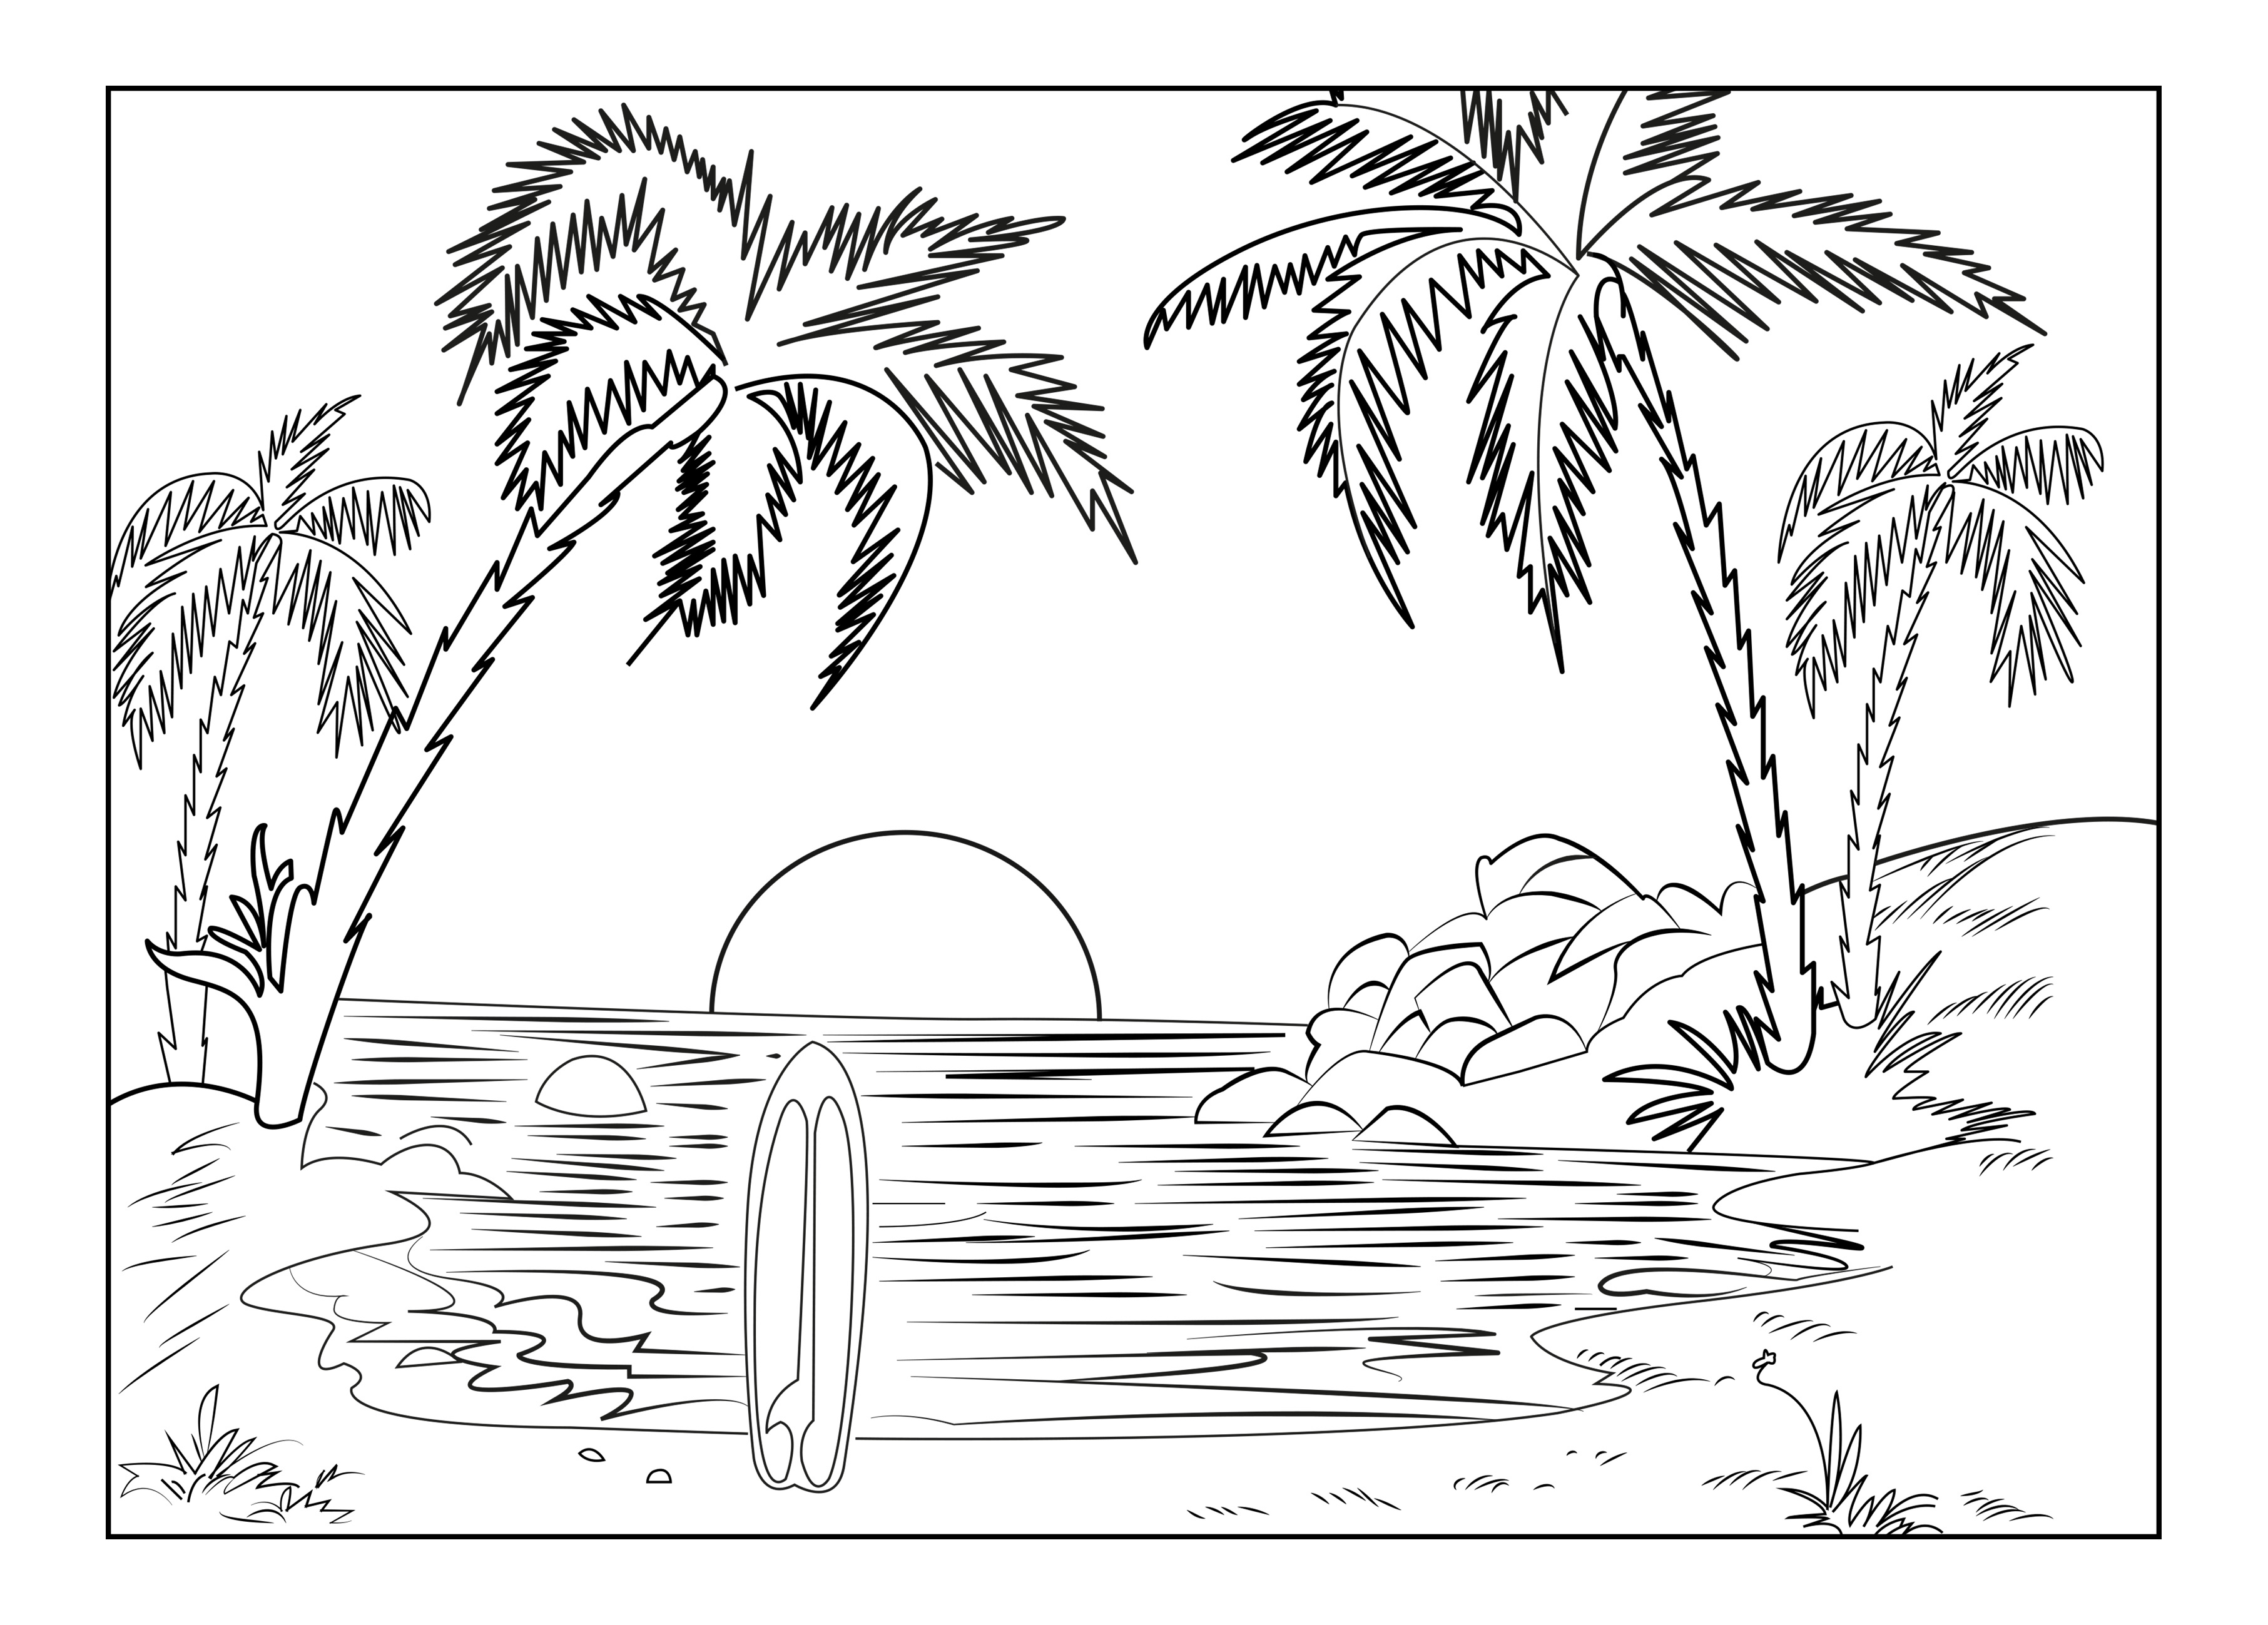 Beach Coloring Pages / Coloring Pages Printable Beach Coloring Page / Beach coloring pages illustrations & vectors.